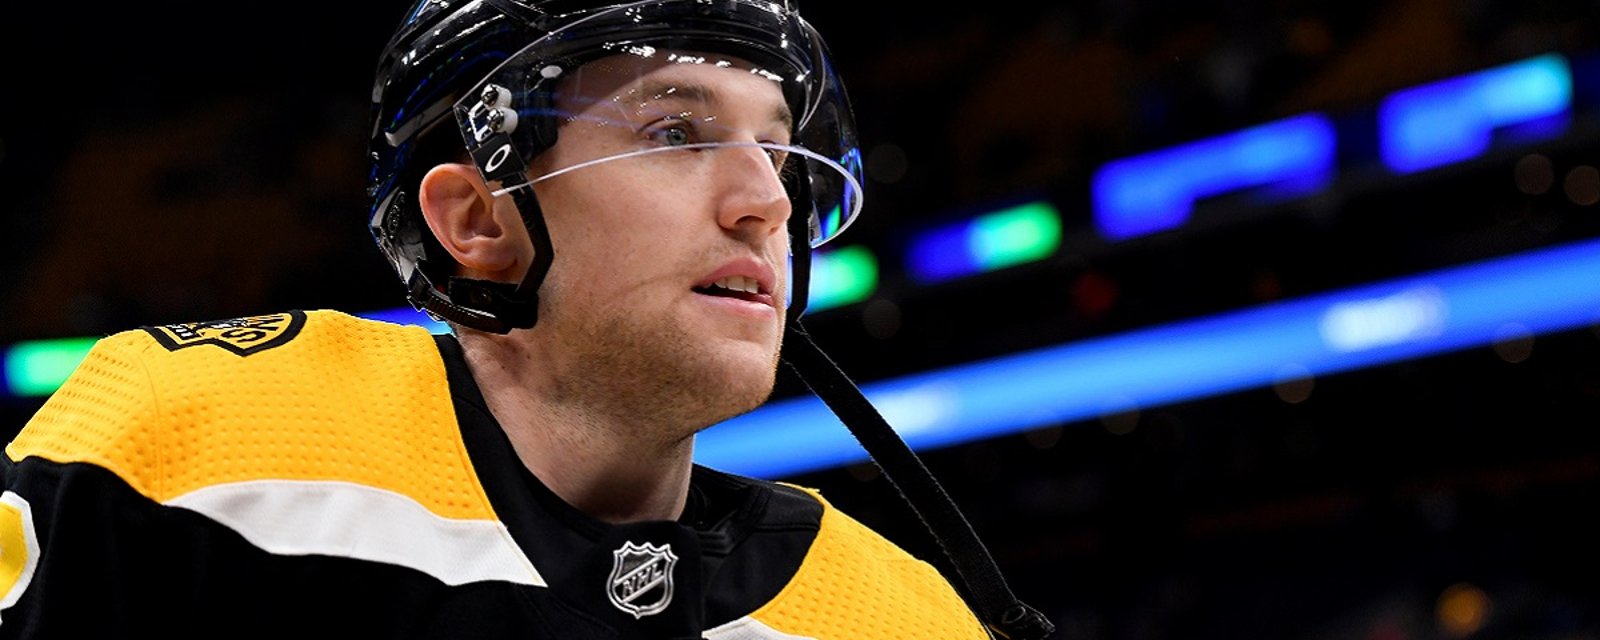 Injury updates on Smith, Miller, and Grzelcyk from the Bruins.